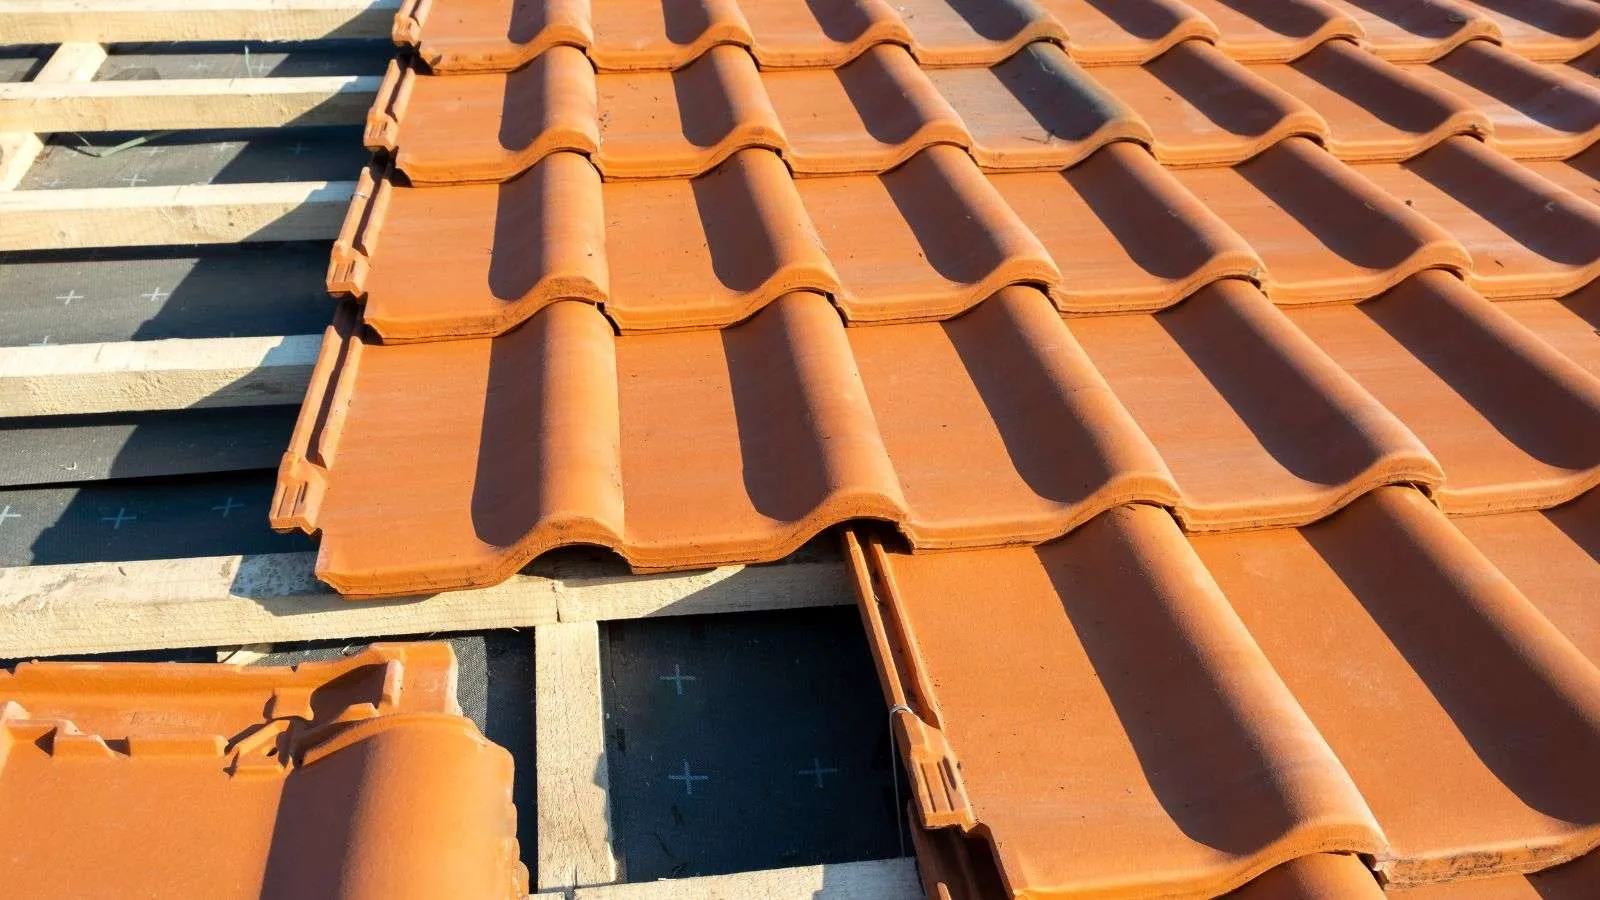 how to overlap roof tiles - bighomeprojects.com